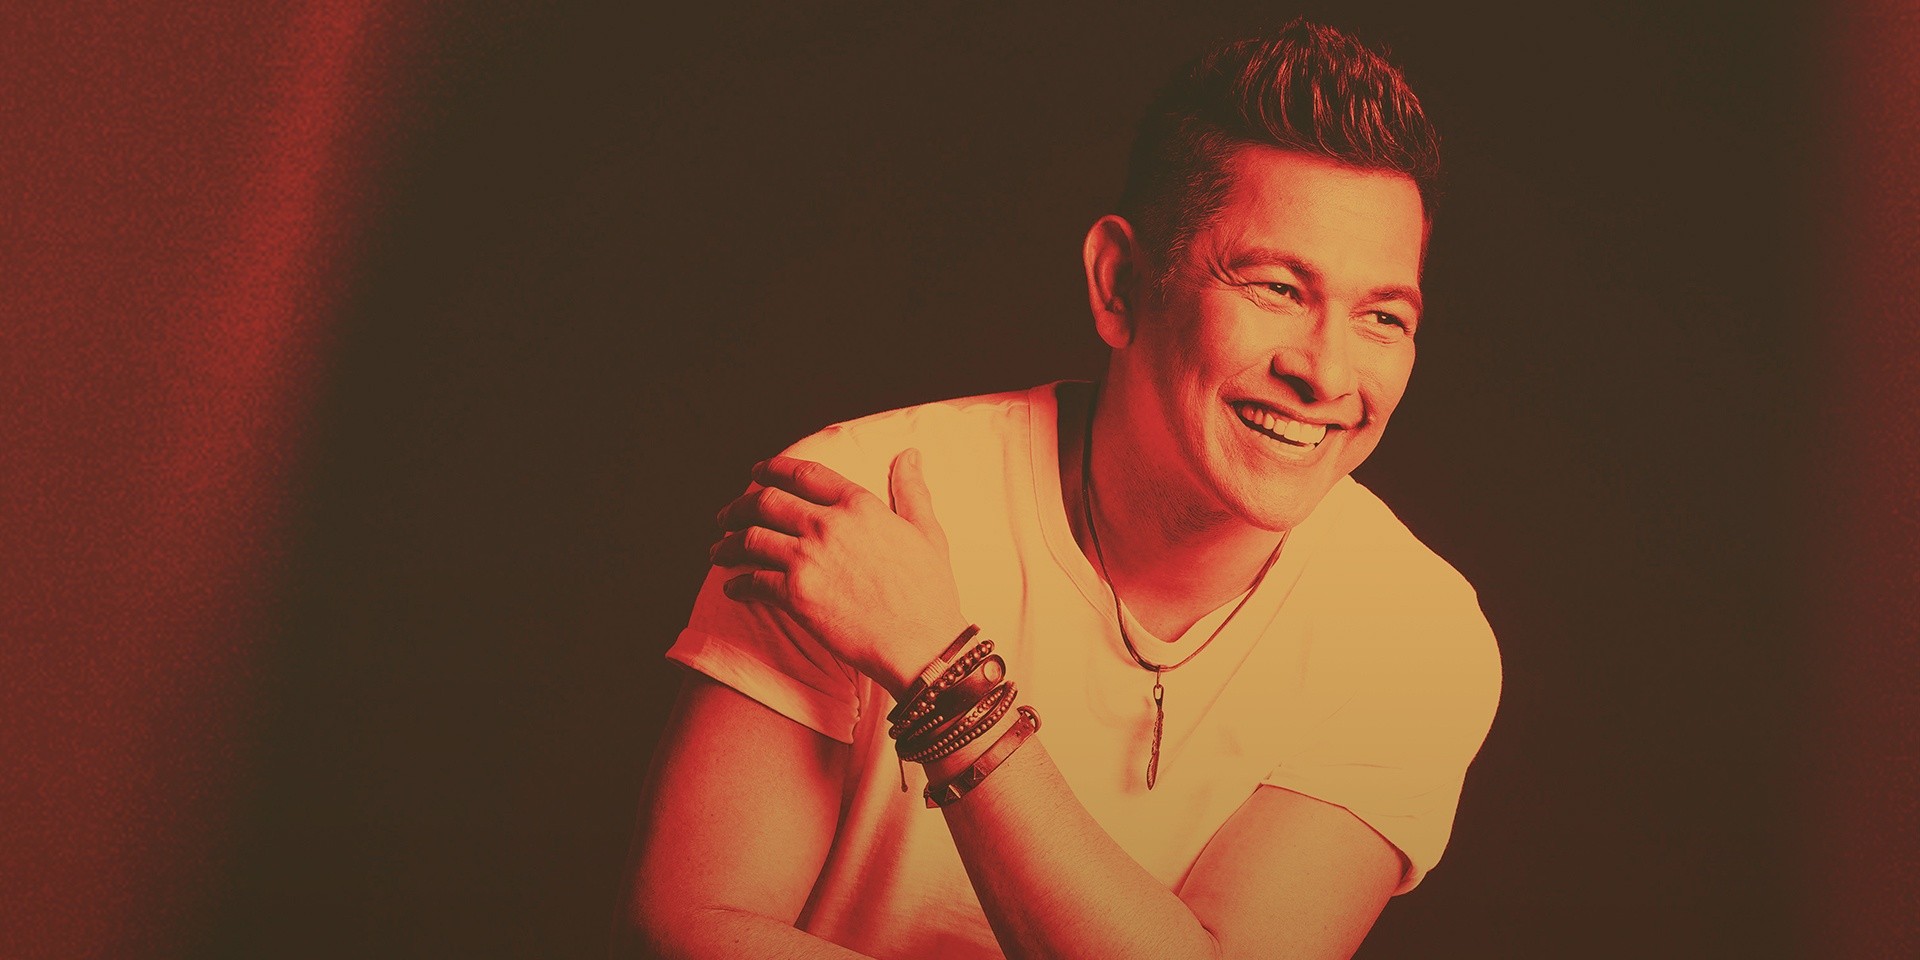 Gary Valenciano to hold digital benefit concert Hopeful 2020 this weekend